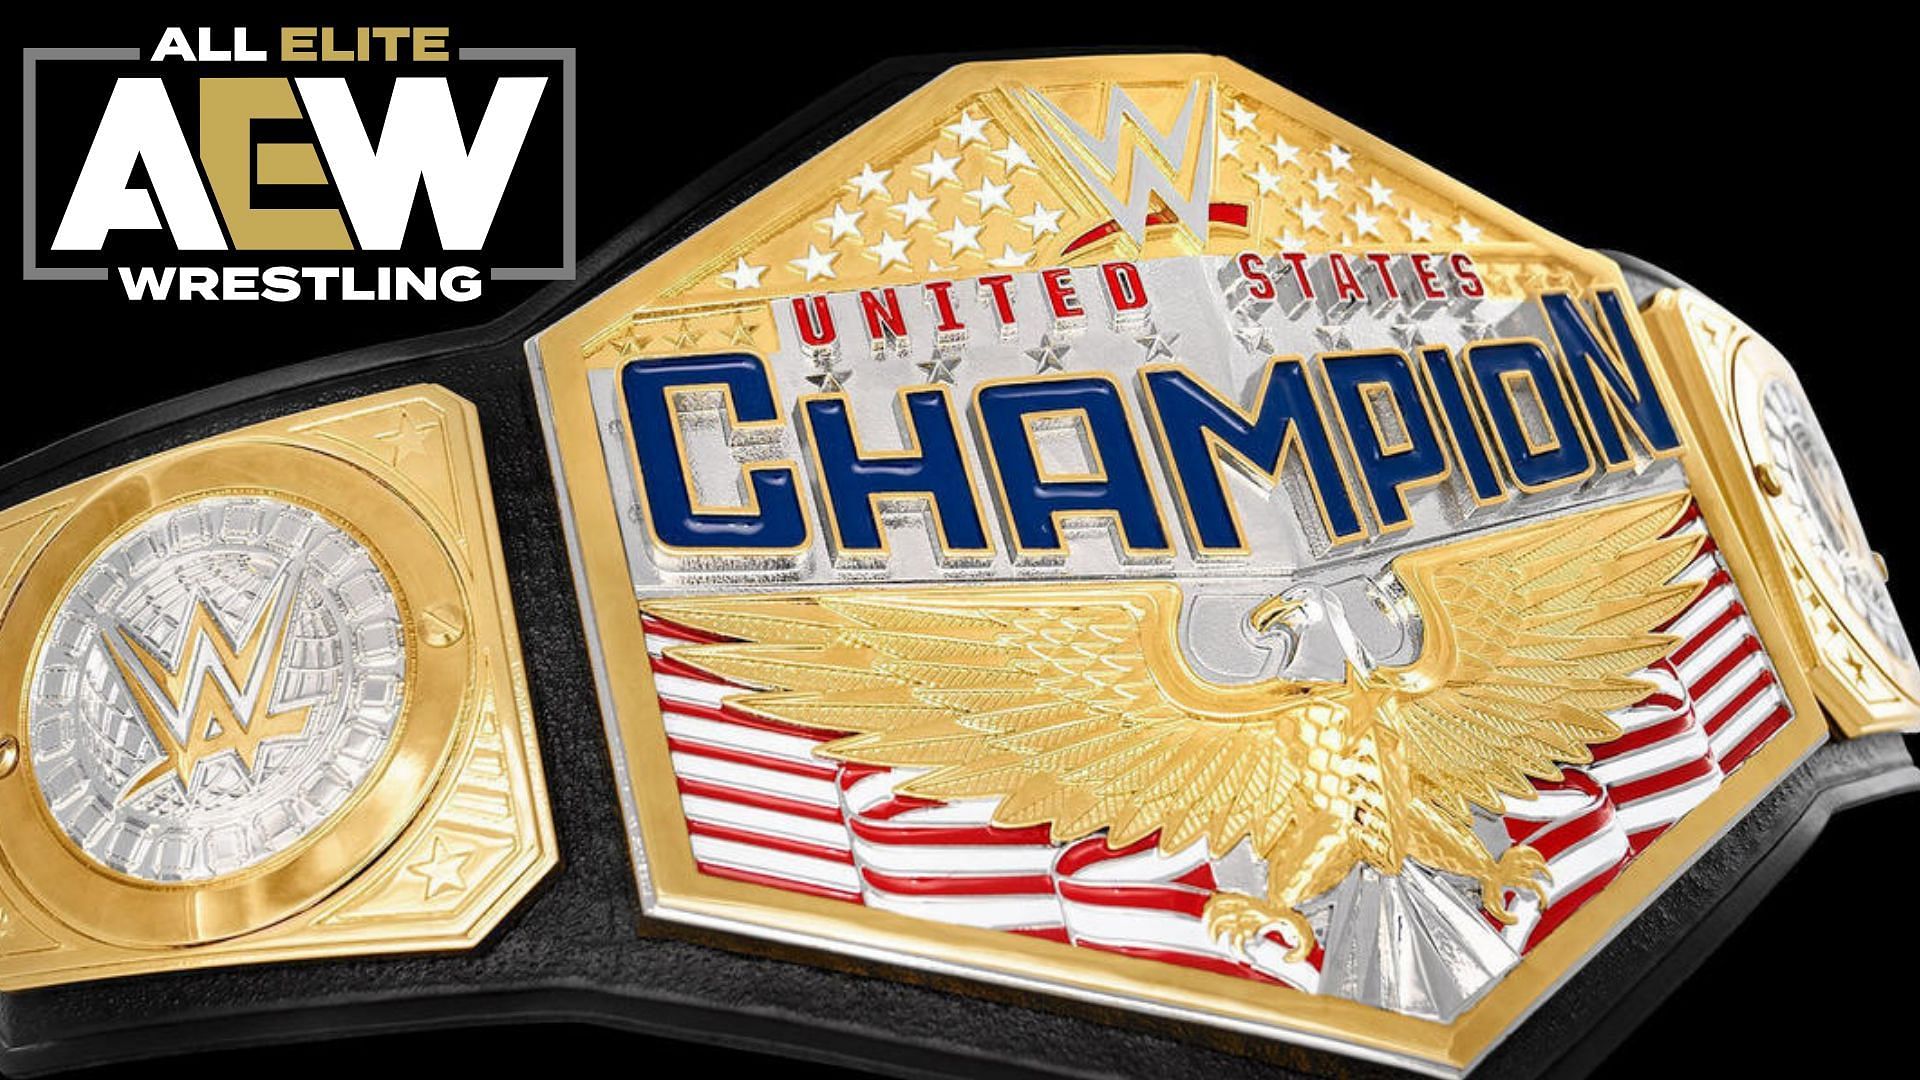 Which former US Champion could feature heavily on AEW Collision?